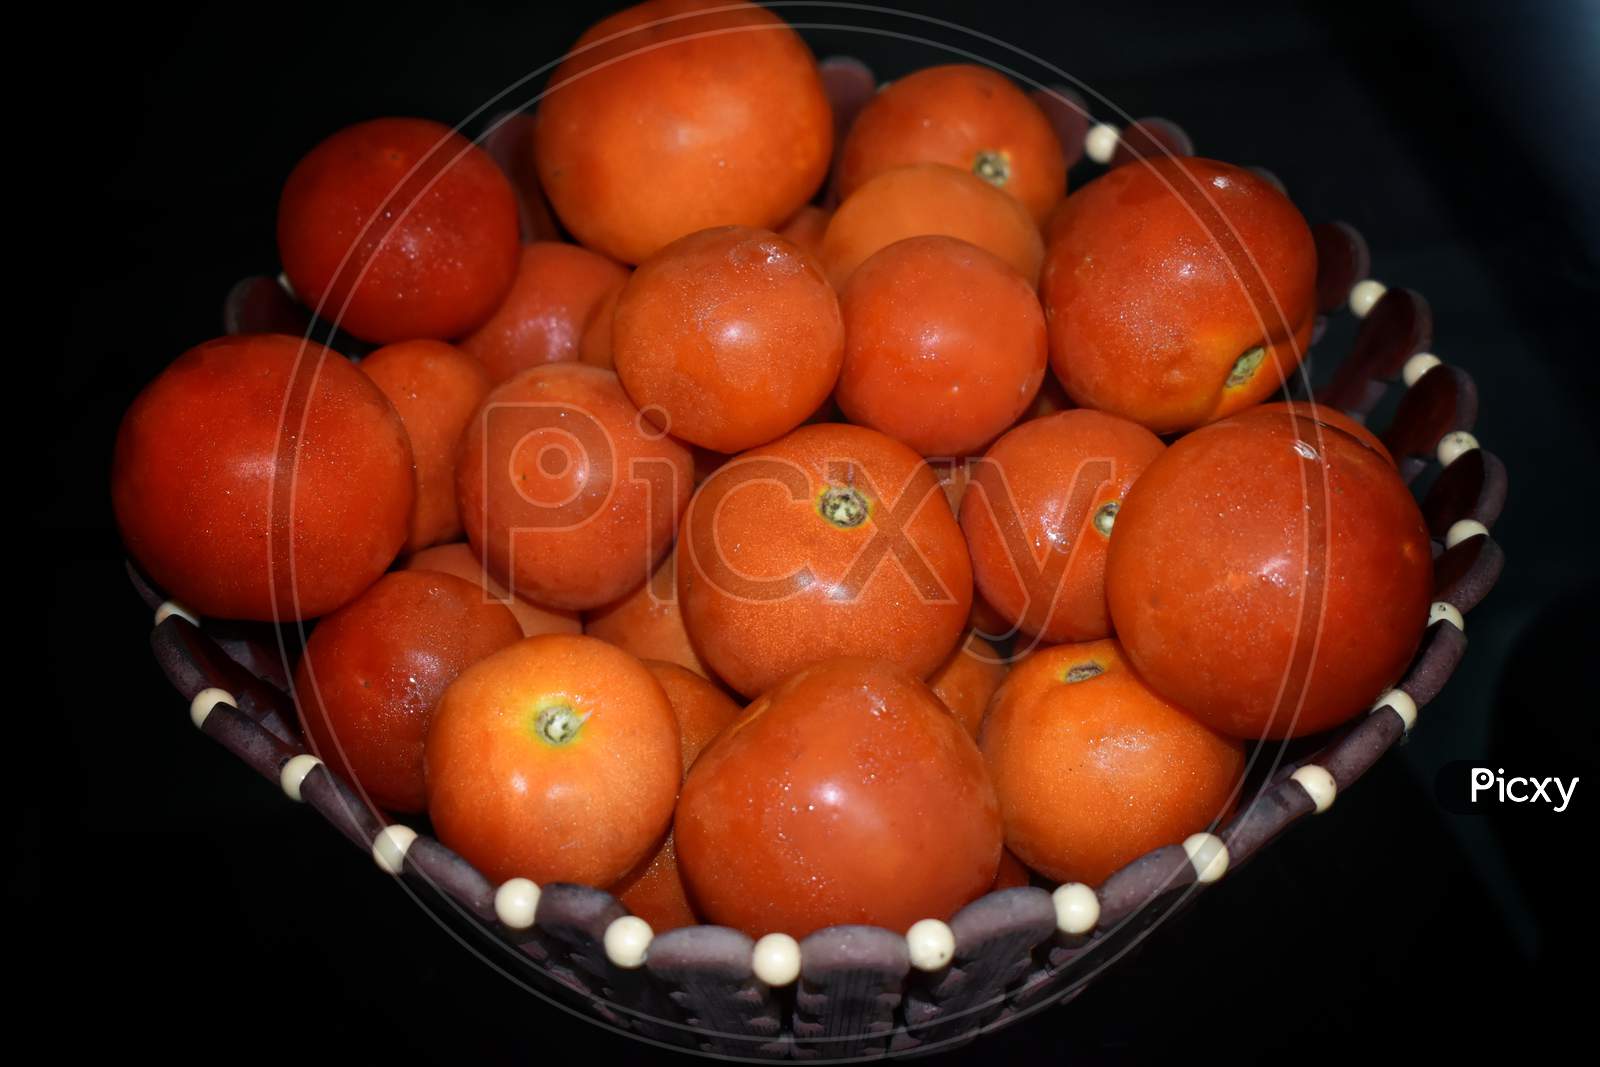 Fresh Tomatoes In A Plate On A Dark Background. Harvesting Tomatoes. Top View